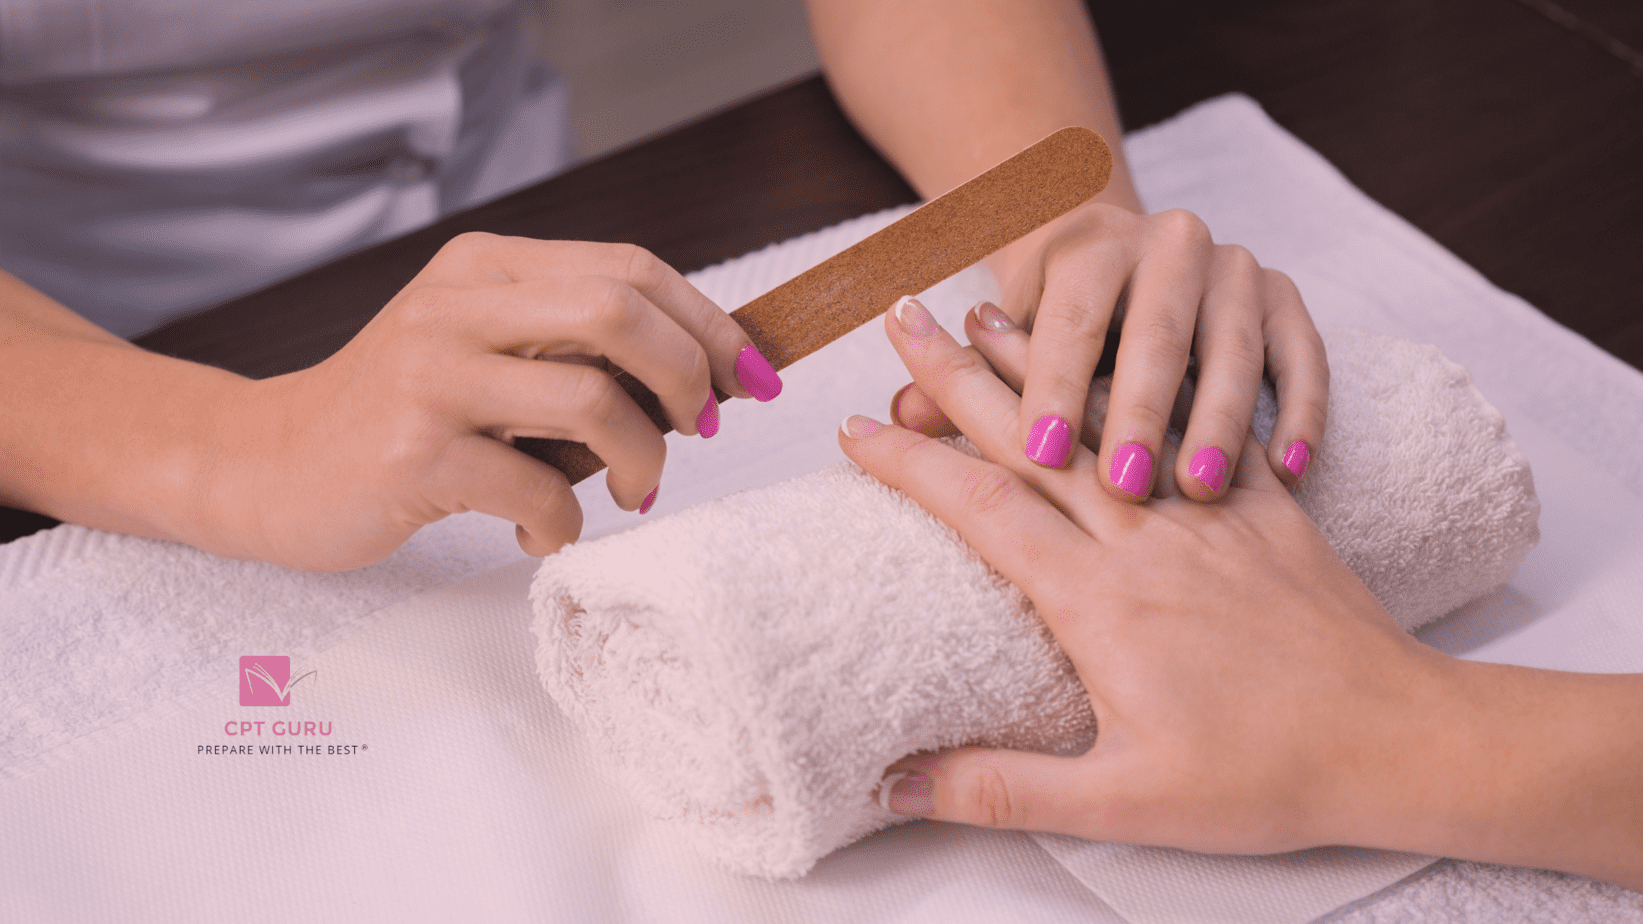 How long does it take to become a nail tech? - CPT Guru